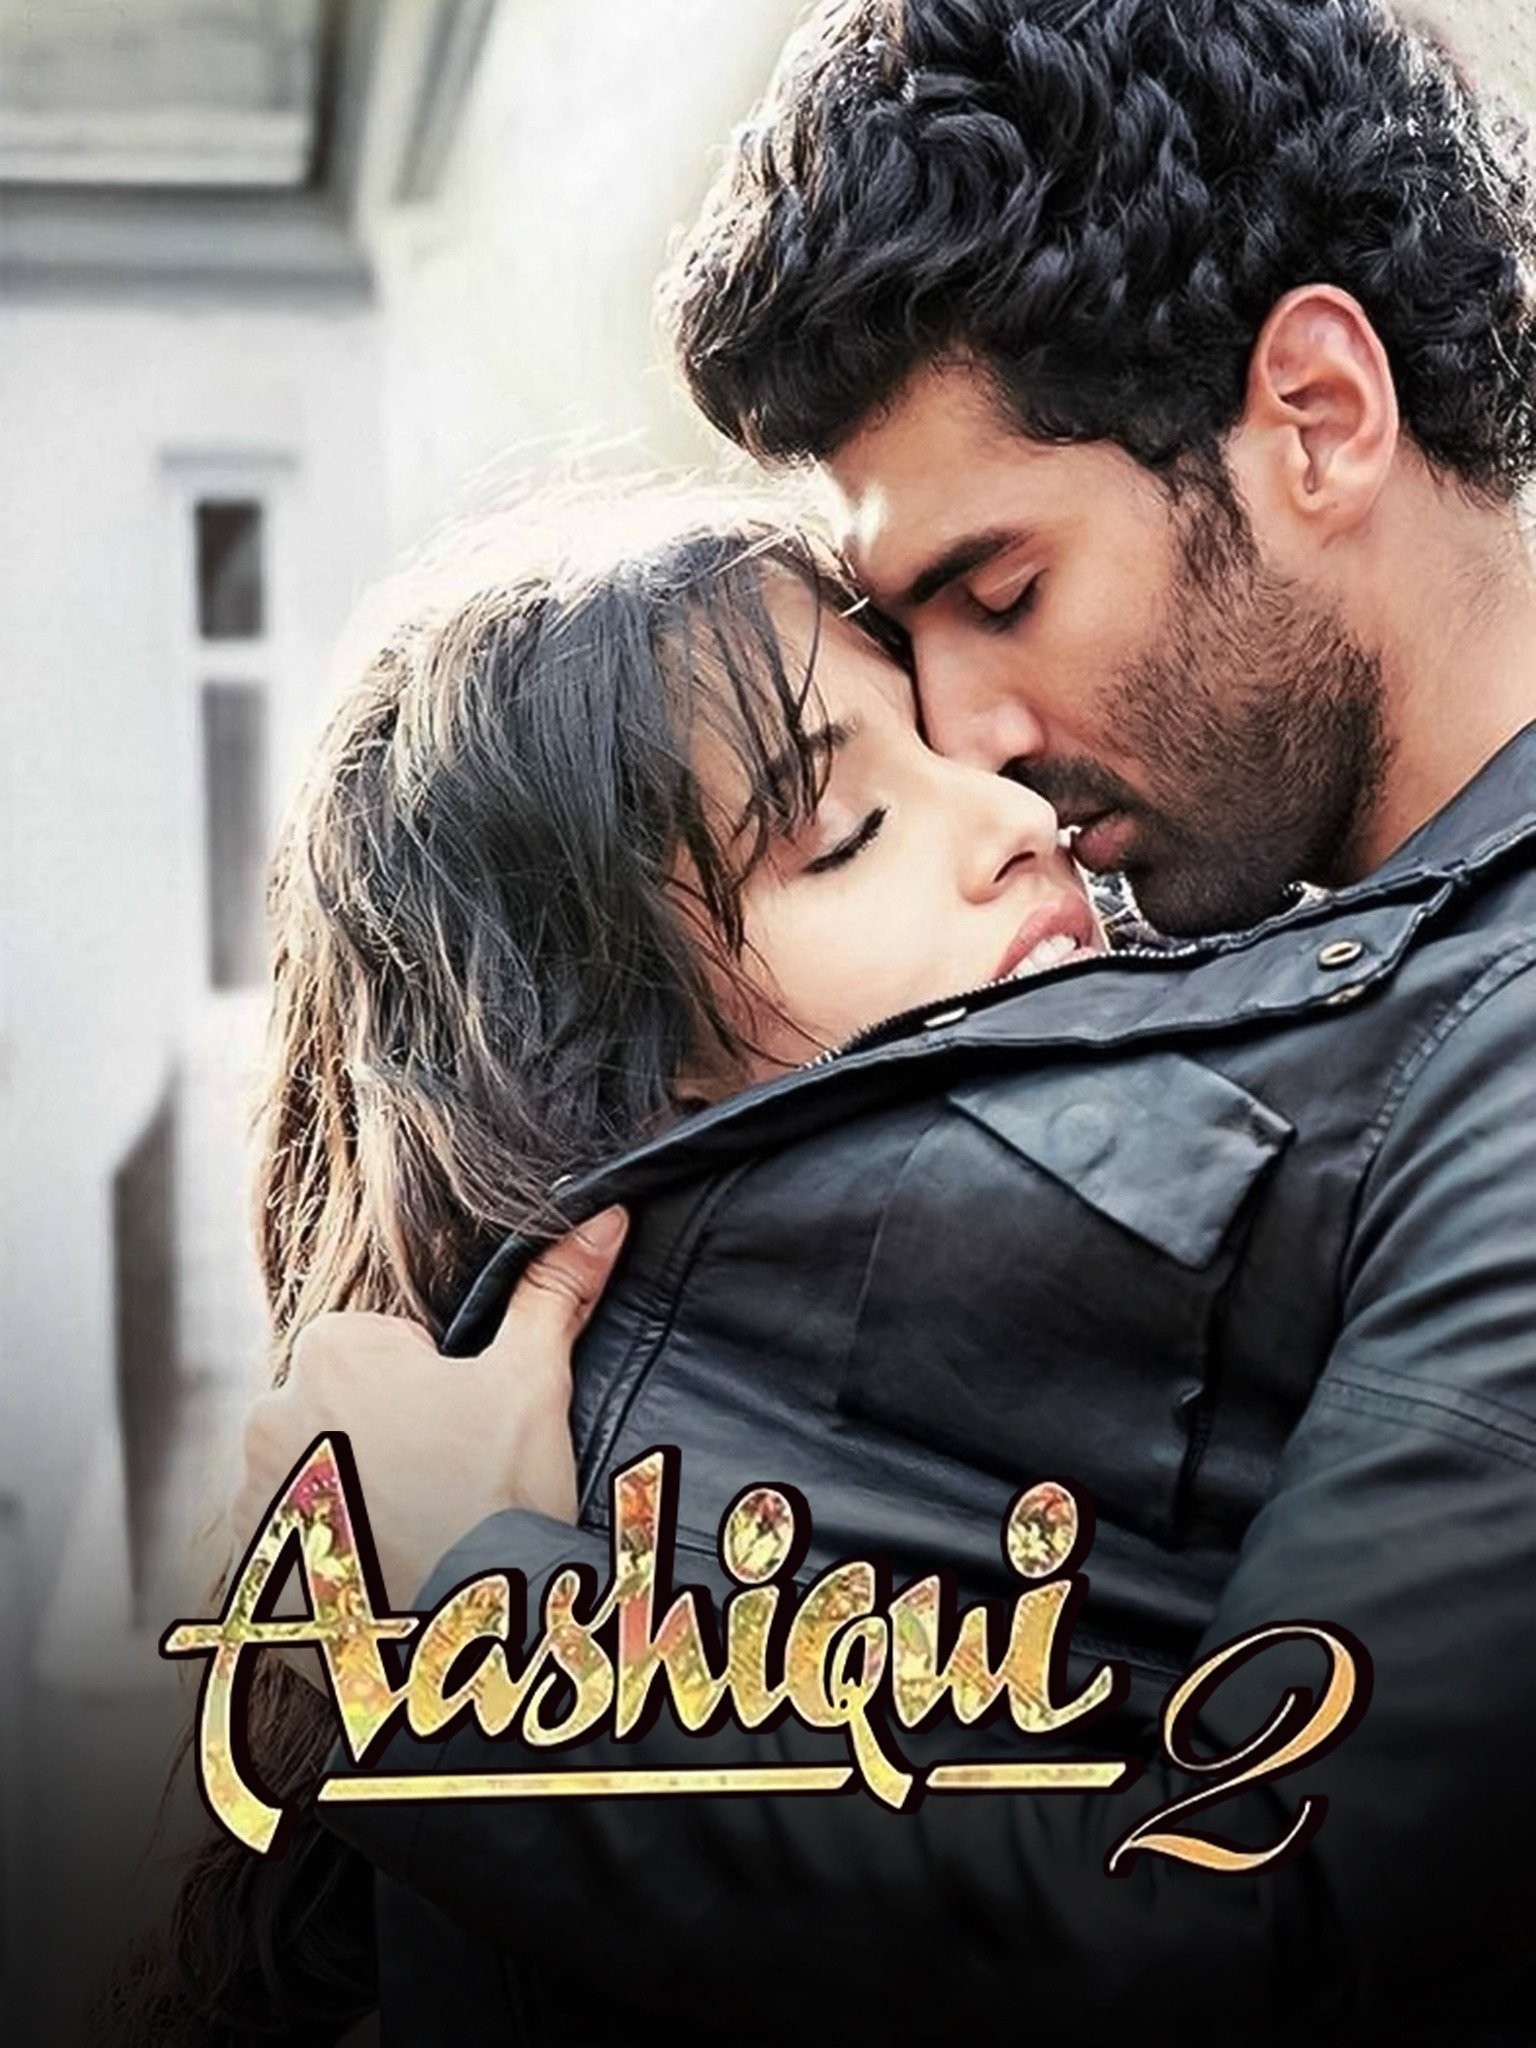 charles hidalgo recommends aashiqui 1 full movie pic